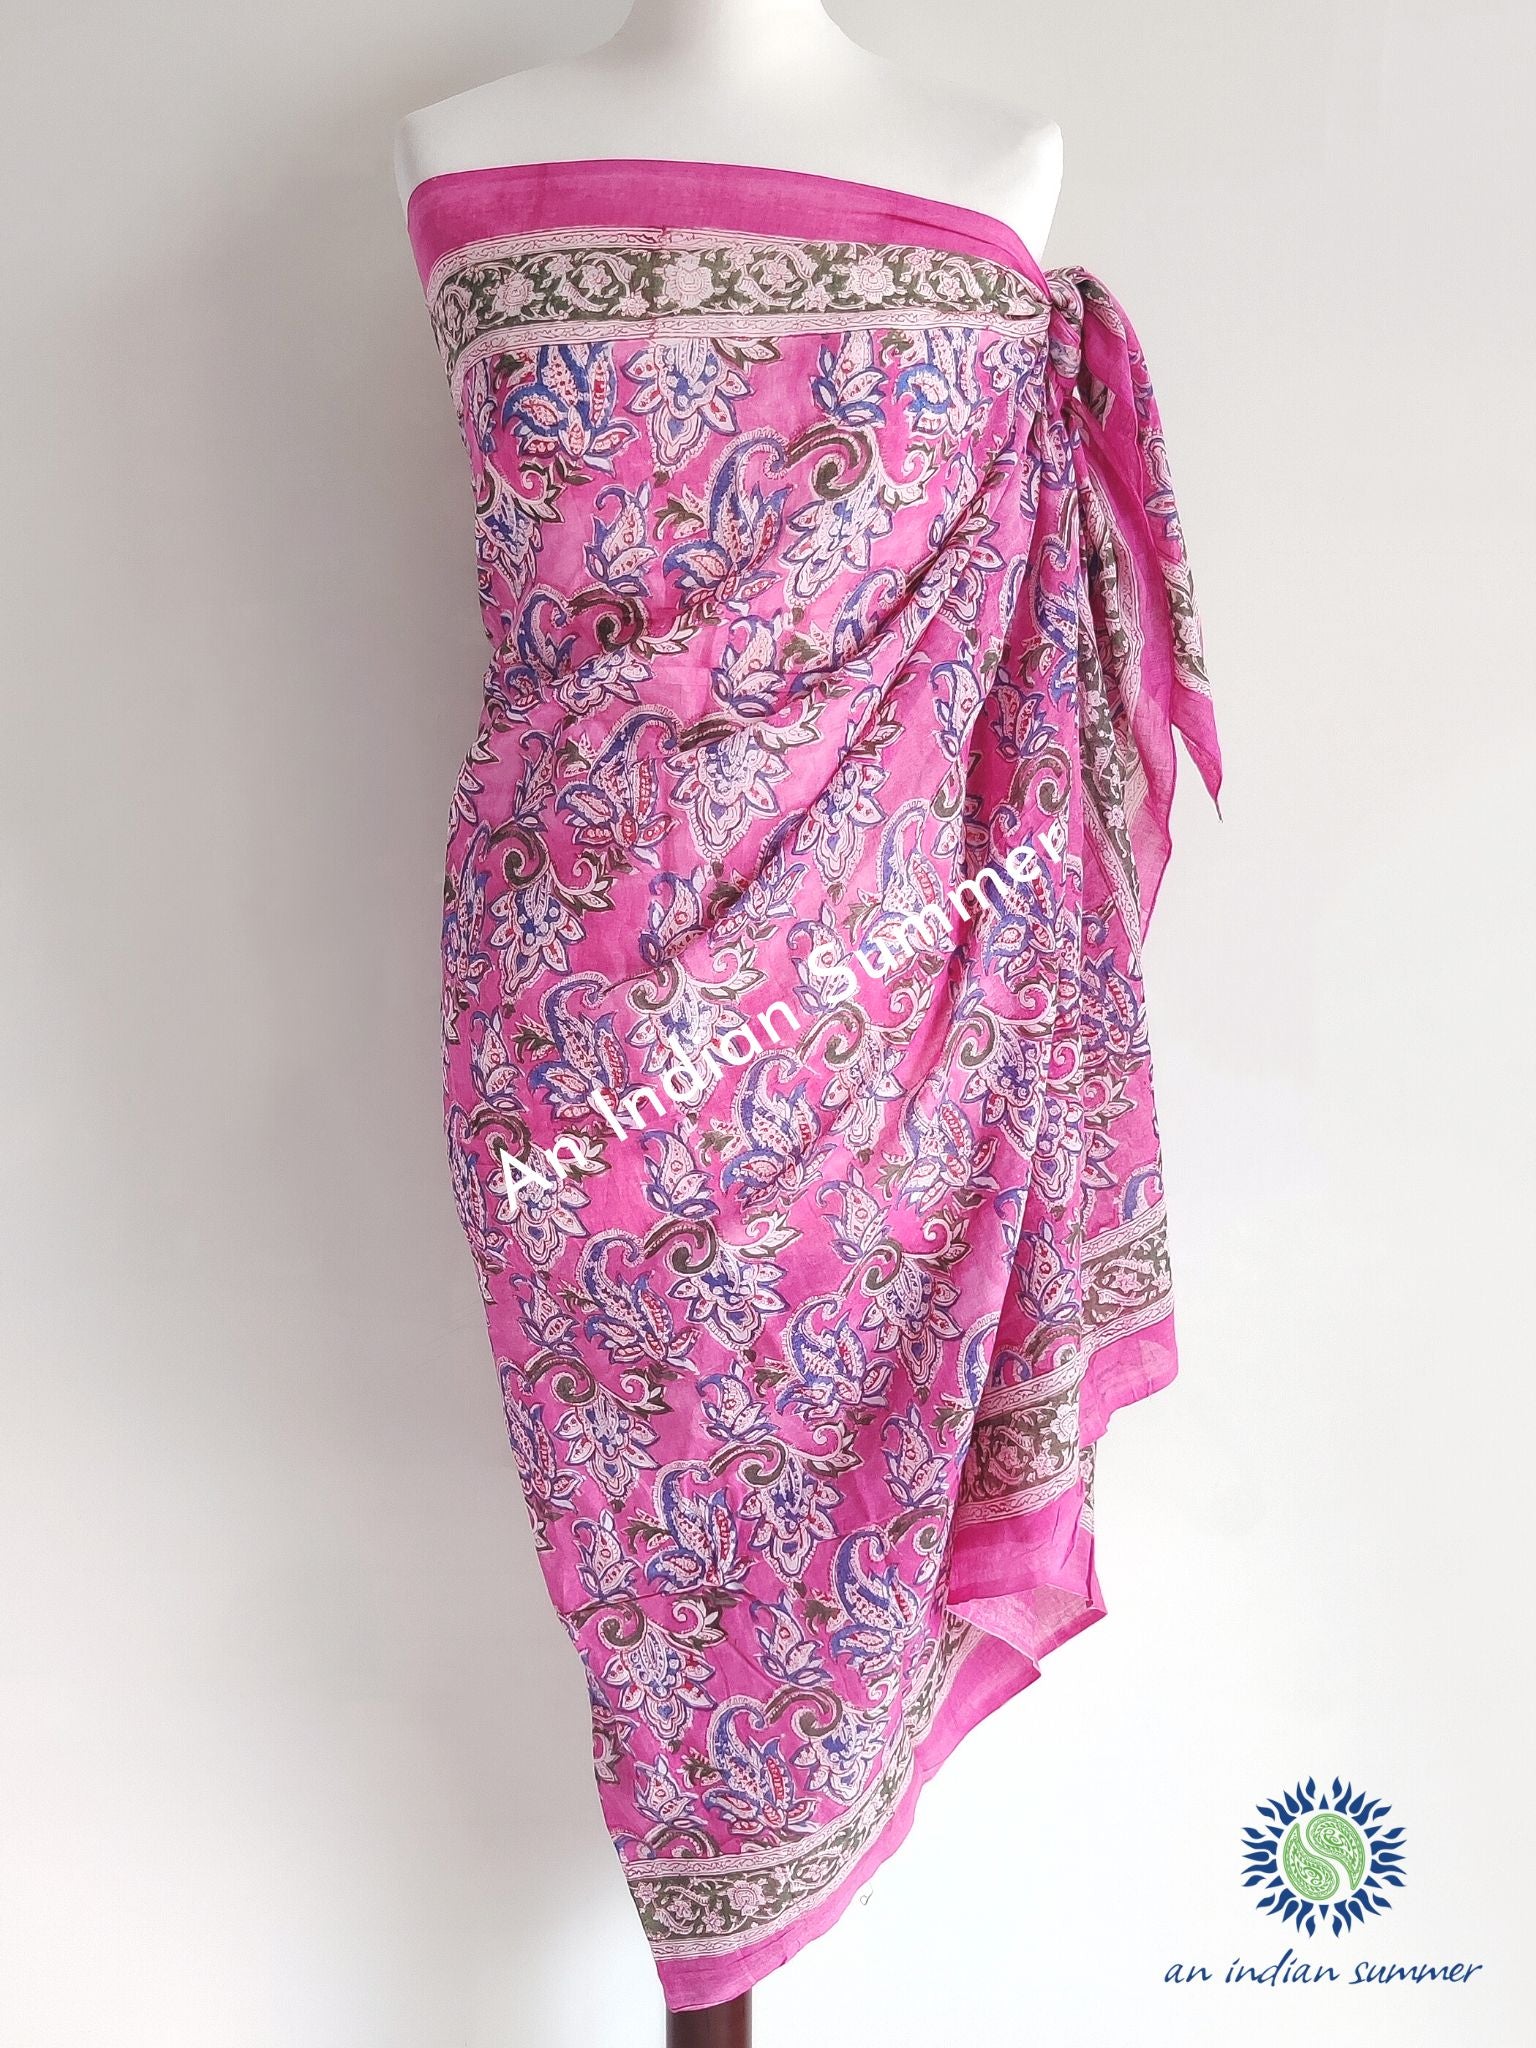 Anuradha Sarong Pareo | Pink Paisley Design | Hand Block Printed | Soft Cotton Voile | An Indian Summer | Seasonless Timeless Sustainable Ethical Authentic Artisan Conscious Clothing Lifestyle Brand